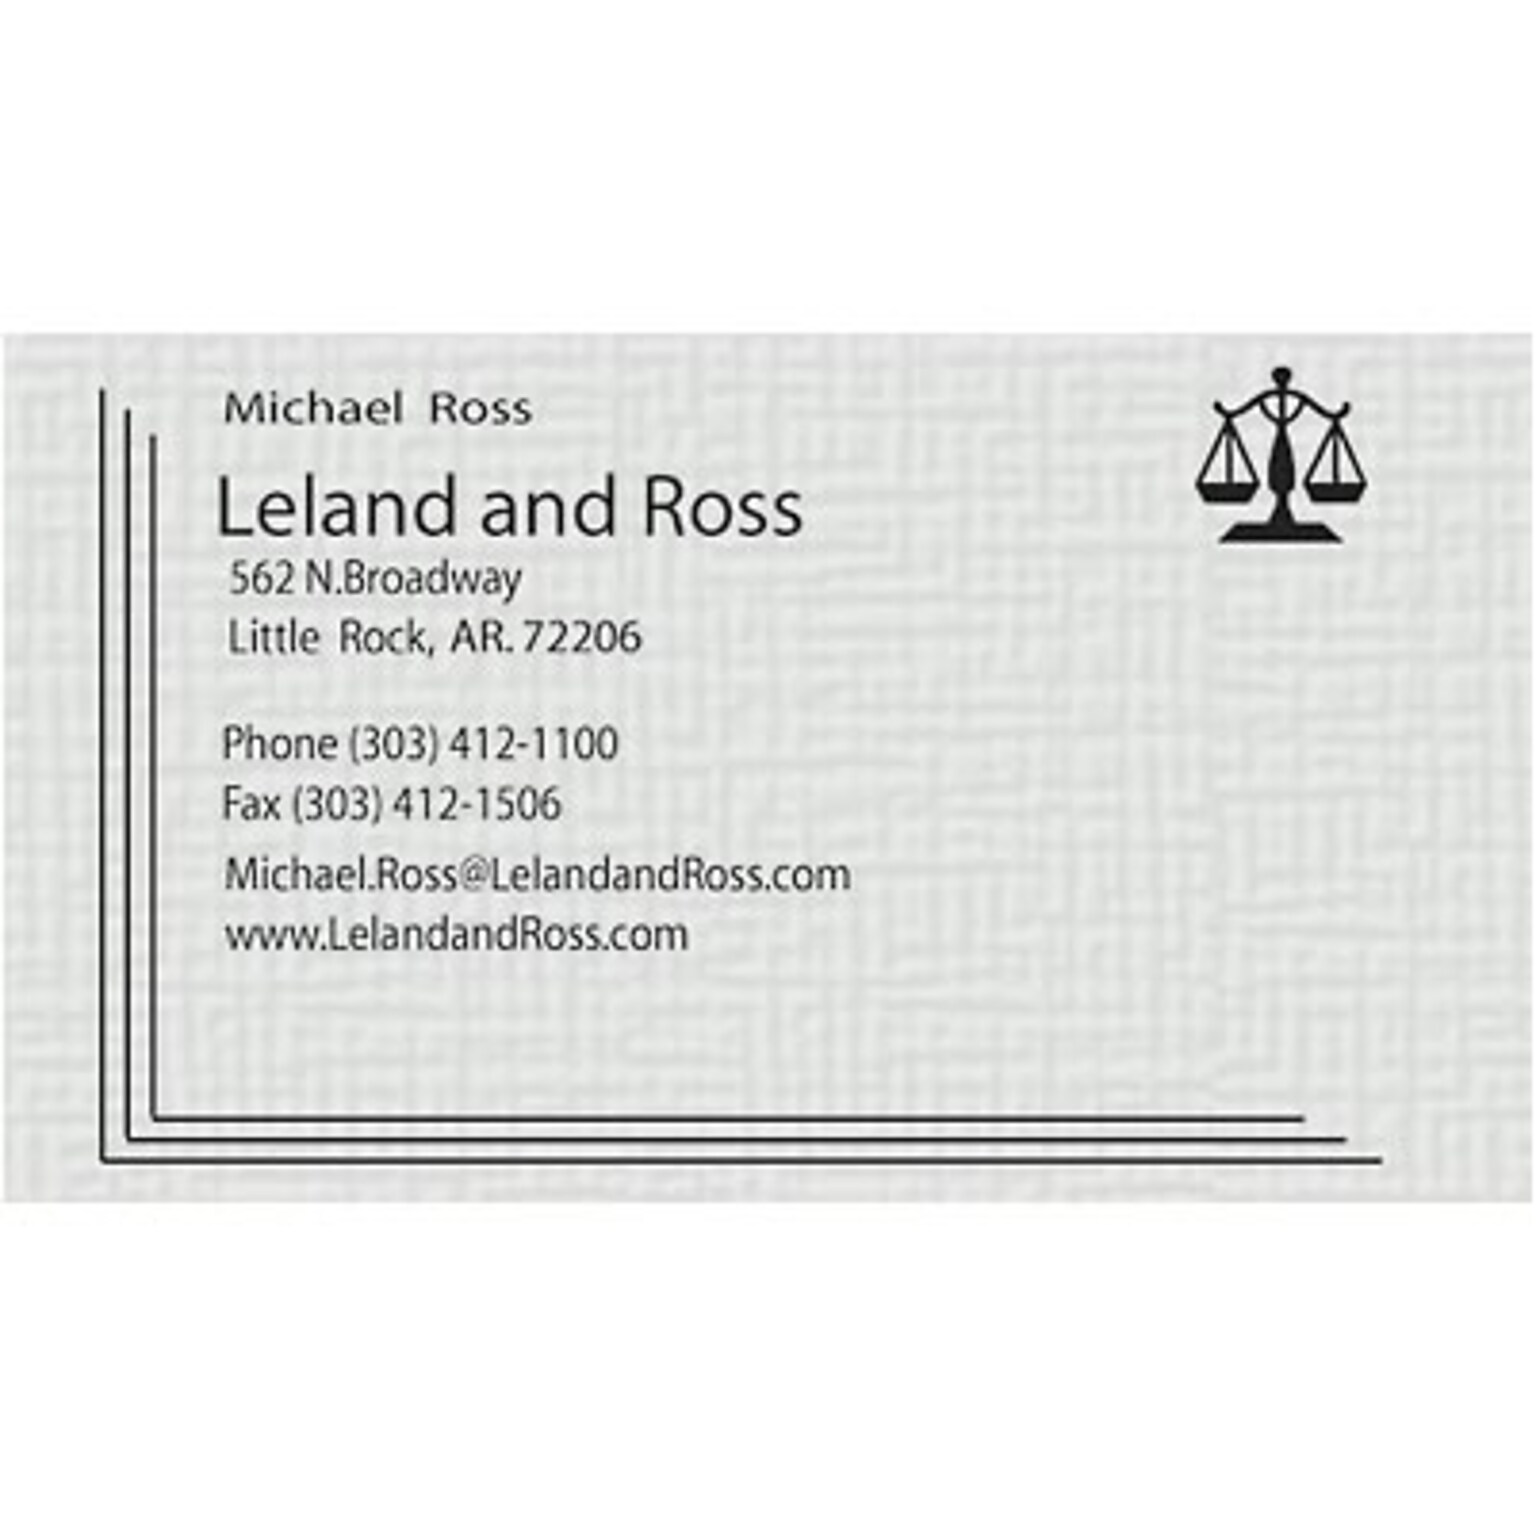 Custom 1-2 Color Business Cards, CLASSIC® Linen Antique Gray 80#, Raised Print, 2 Standard Inks, 2-Sided, 250/PK